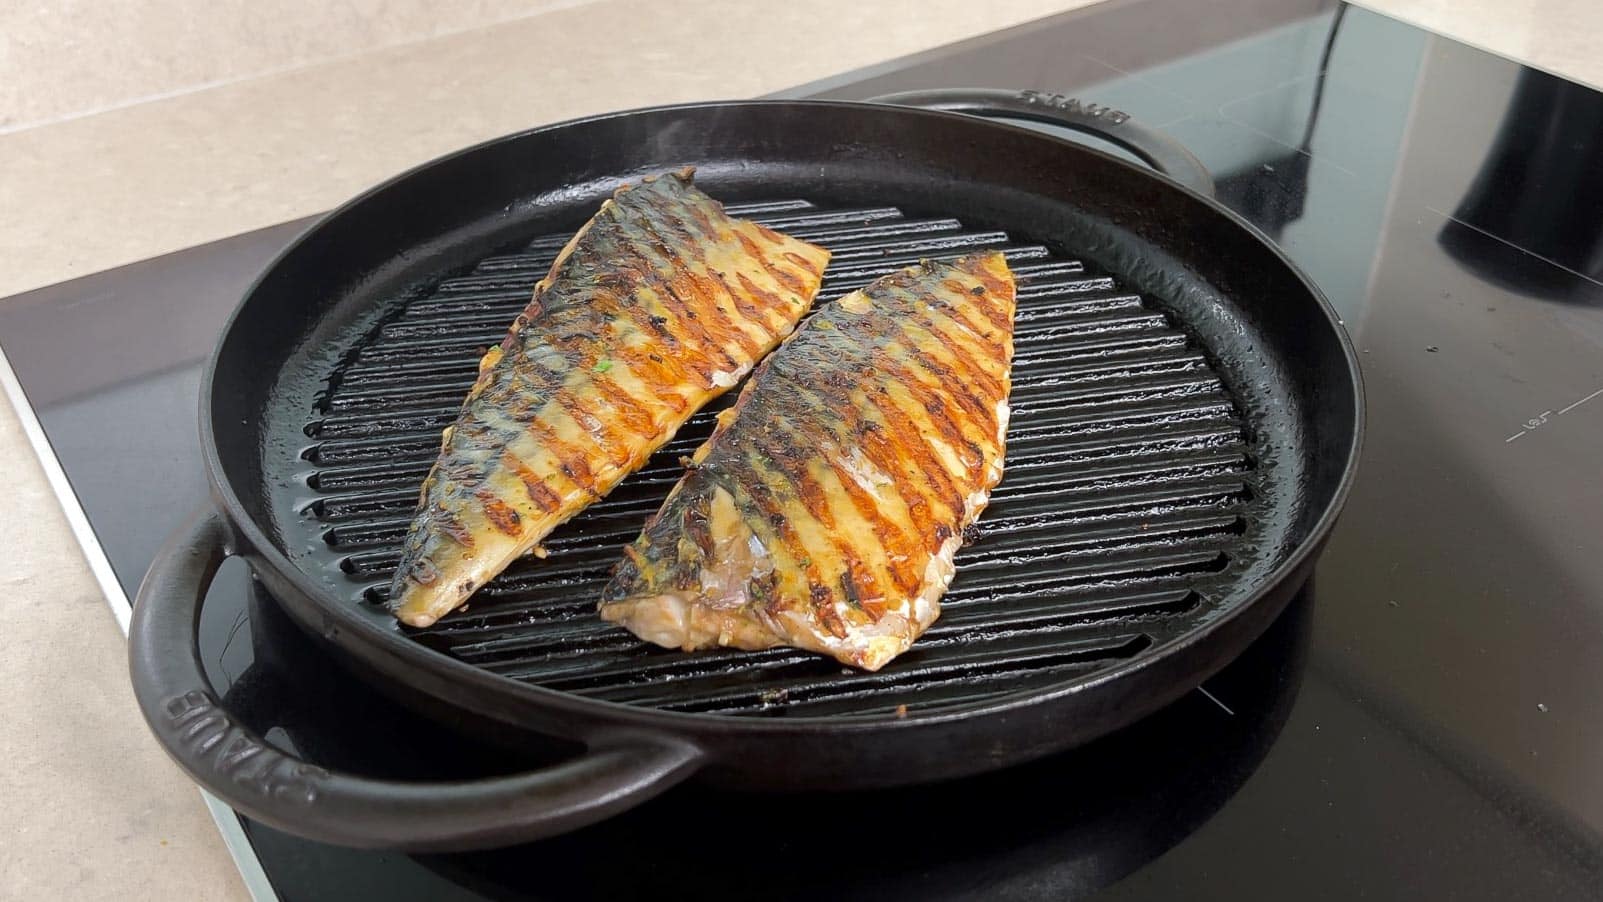 cooking the mackerel fillets on a grill pan